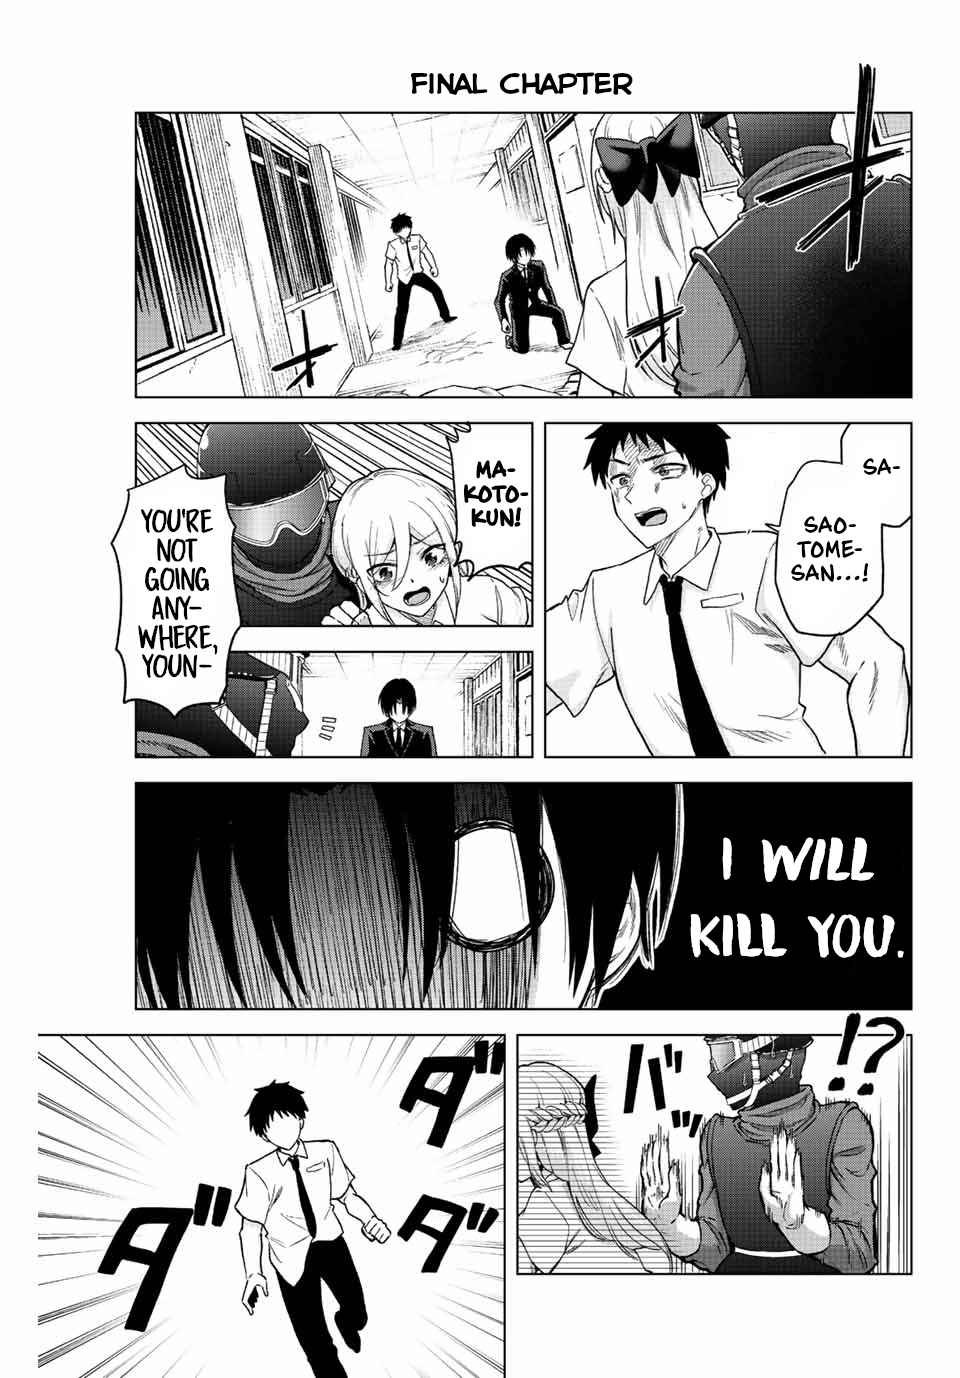 The death game is all that Saotome-san has left 36